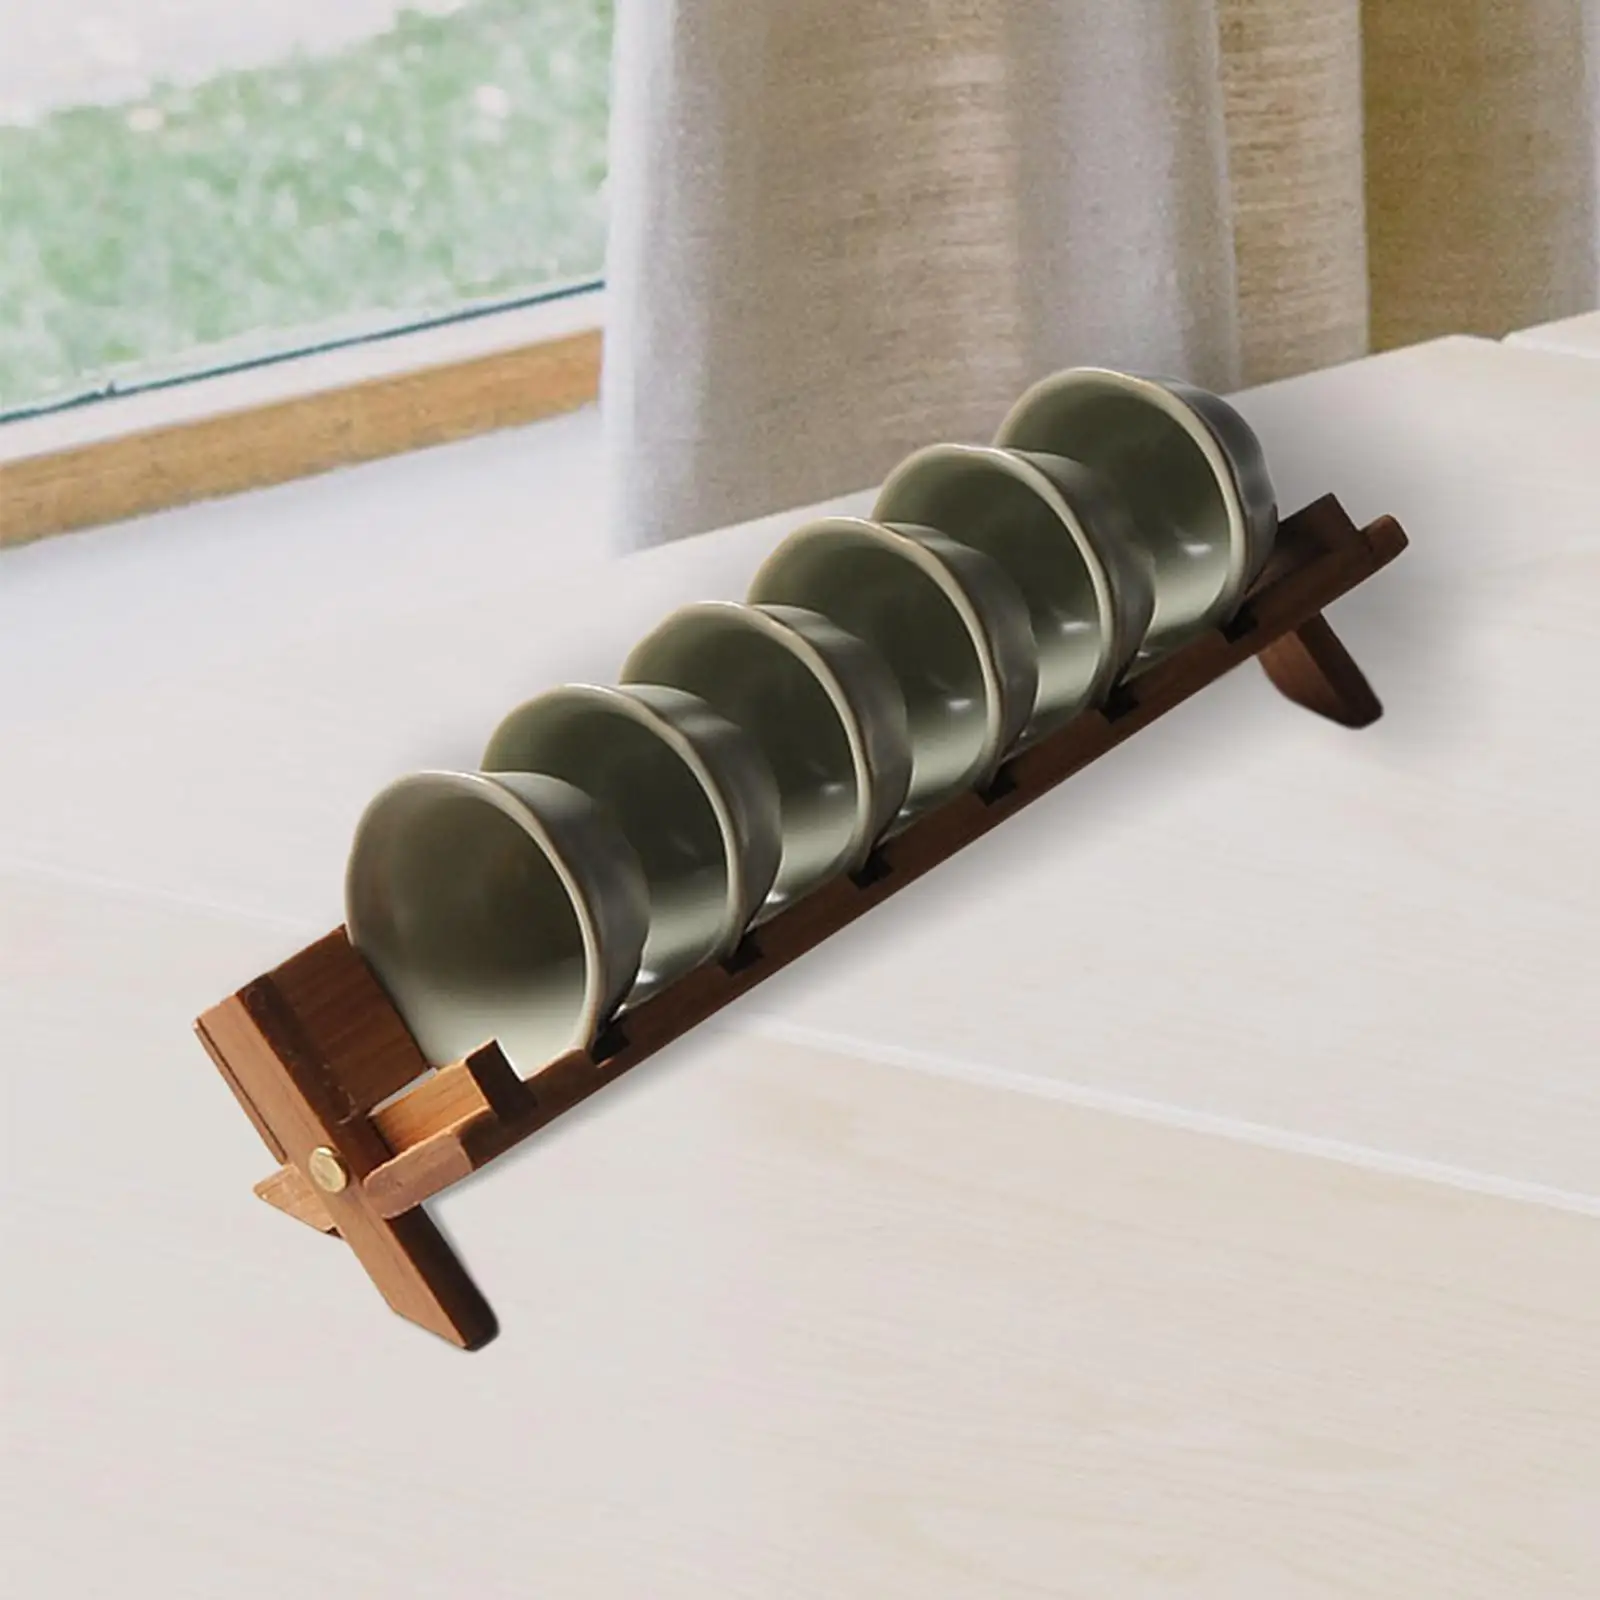 Foldable Bamboo Tea Cup Holder Fitments Crafts for Home Office Tea House